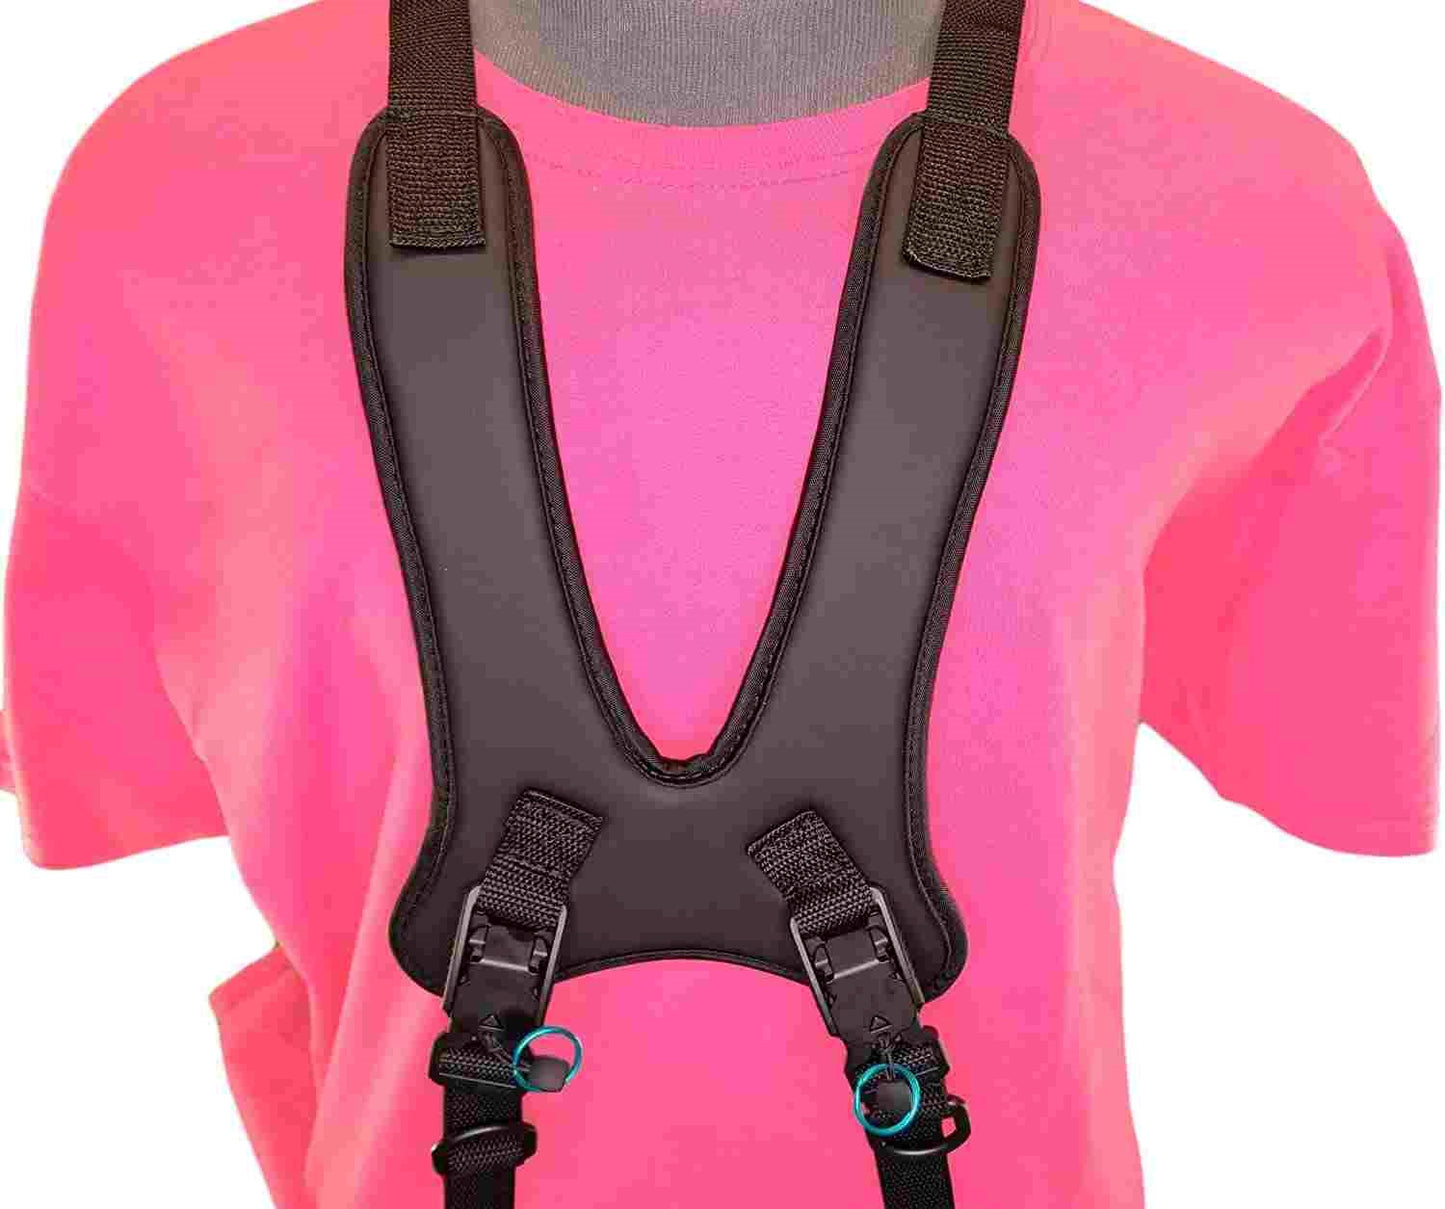 Limit-Less Wheelchair Male Chest Harness with Limit-Less Magnetic Self Engaging Buckles